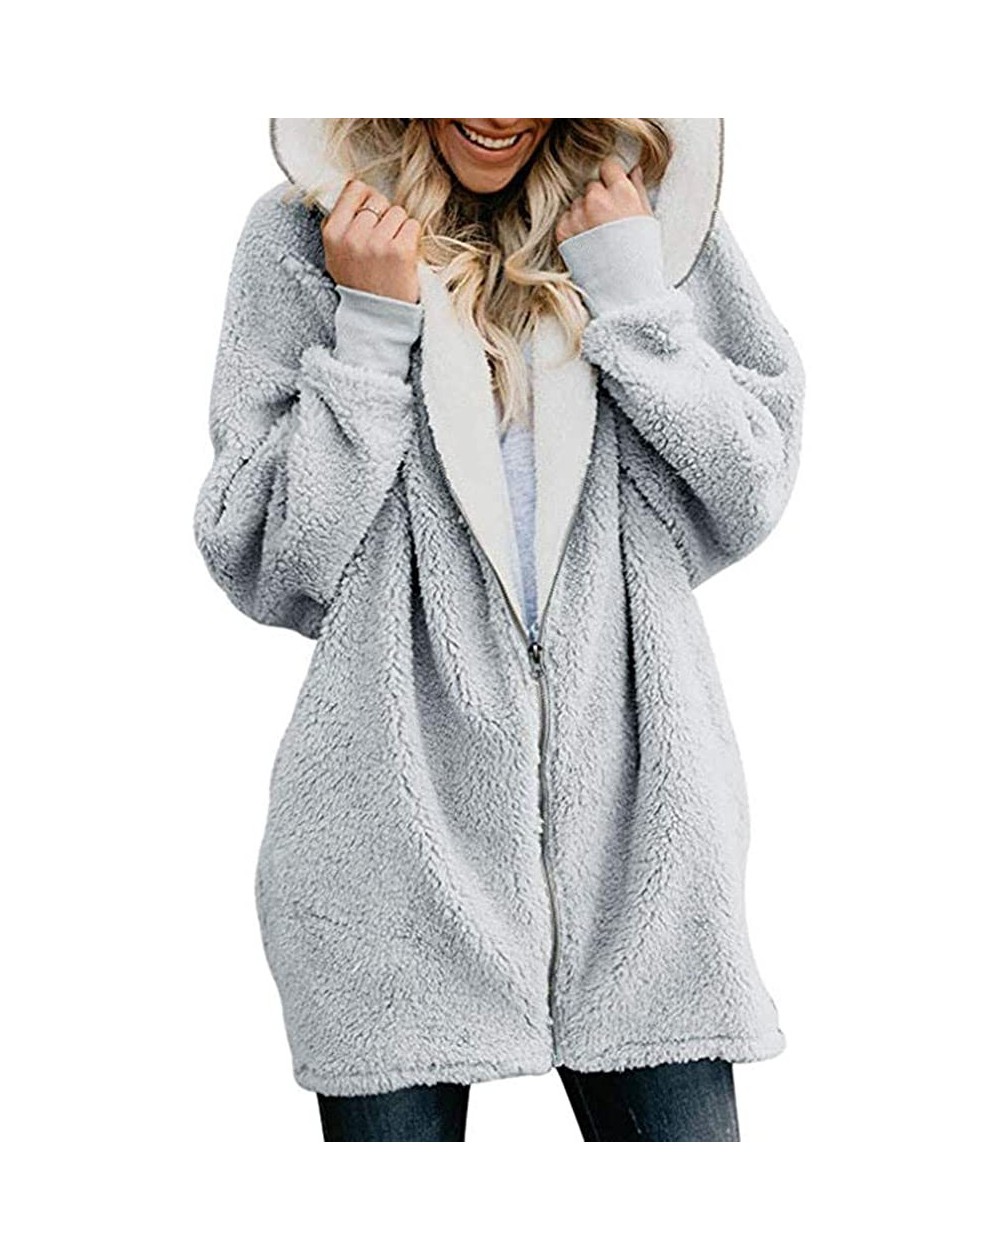 Birthday Candles Women Winter Coats Plus Size Solid Zip Down Hooded Jacket Casual Loose Fluffy Coat Cardigans Outwear with Po...